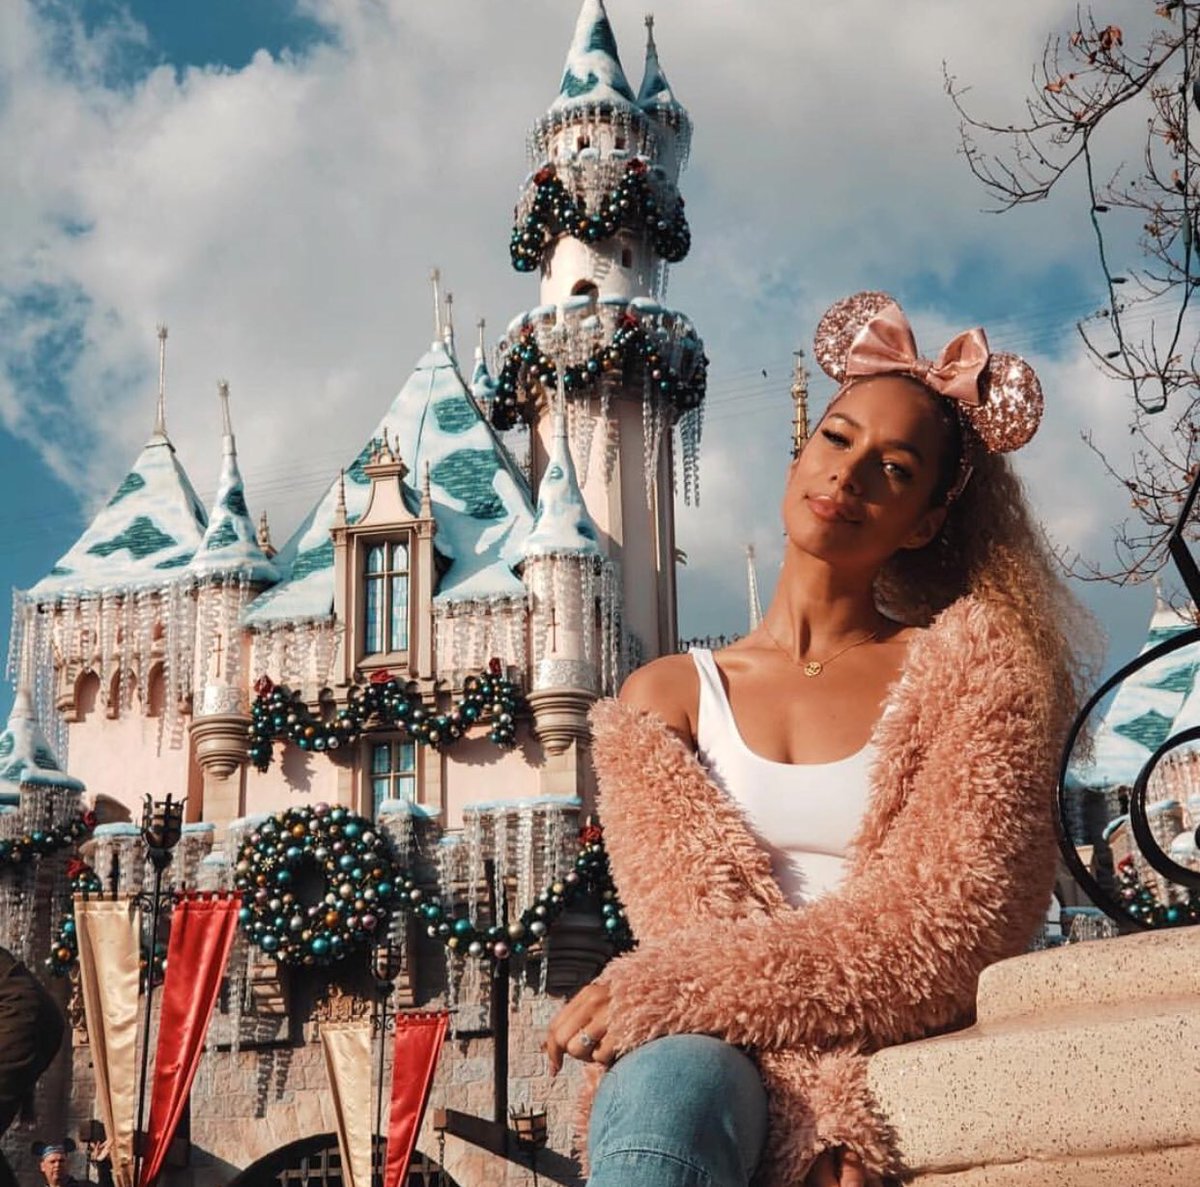 Feeling like a princess today @disneyland ????✨  Thank you for the most lovely time #Disneyland #HolidaysBeginHere https://t.co/wMtnkAoTQO